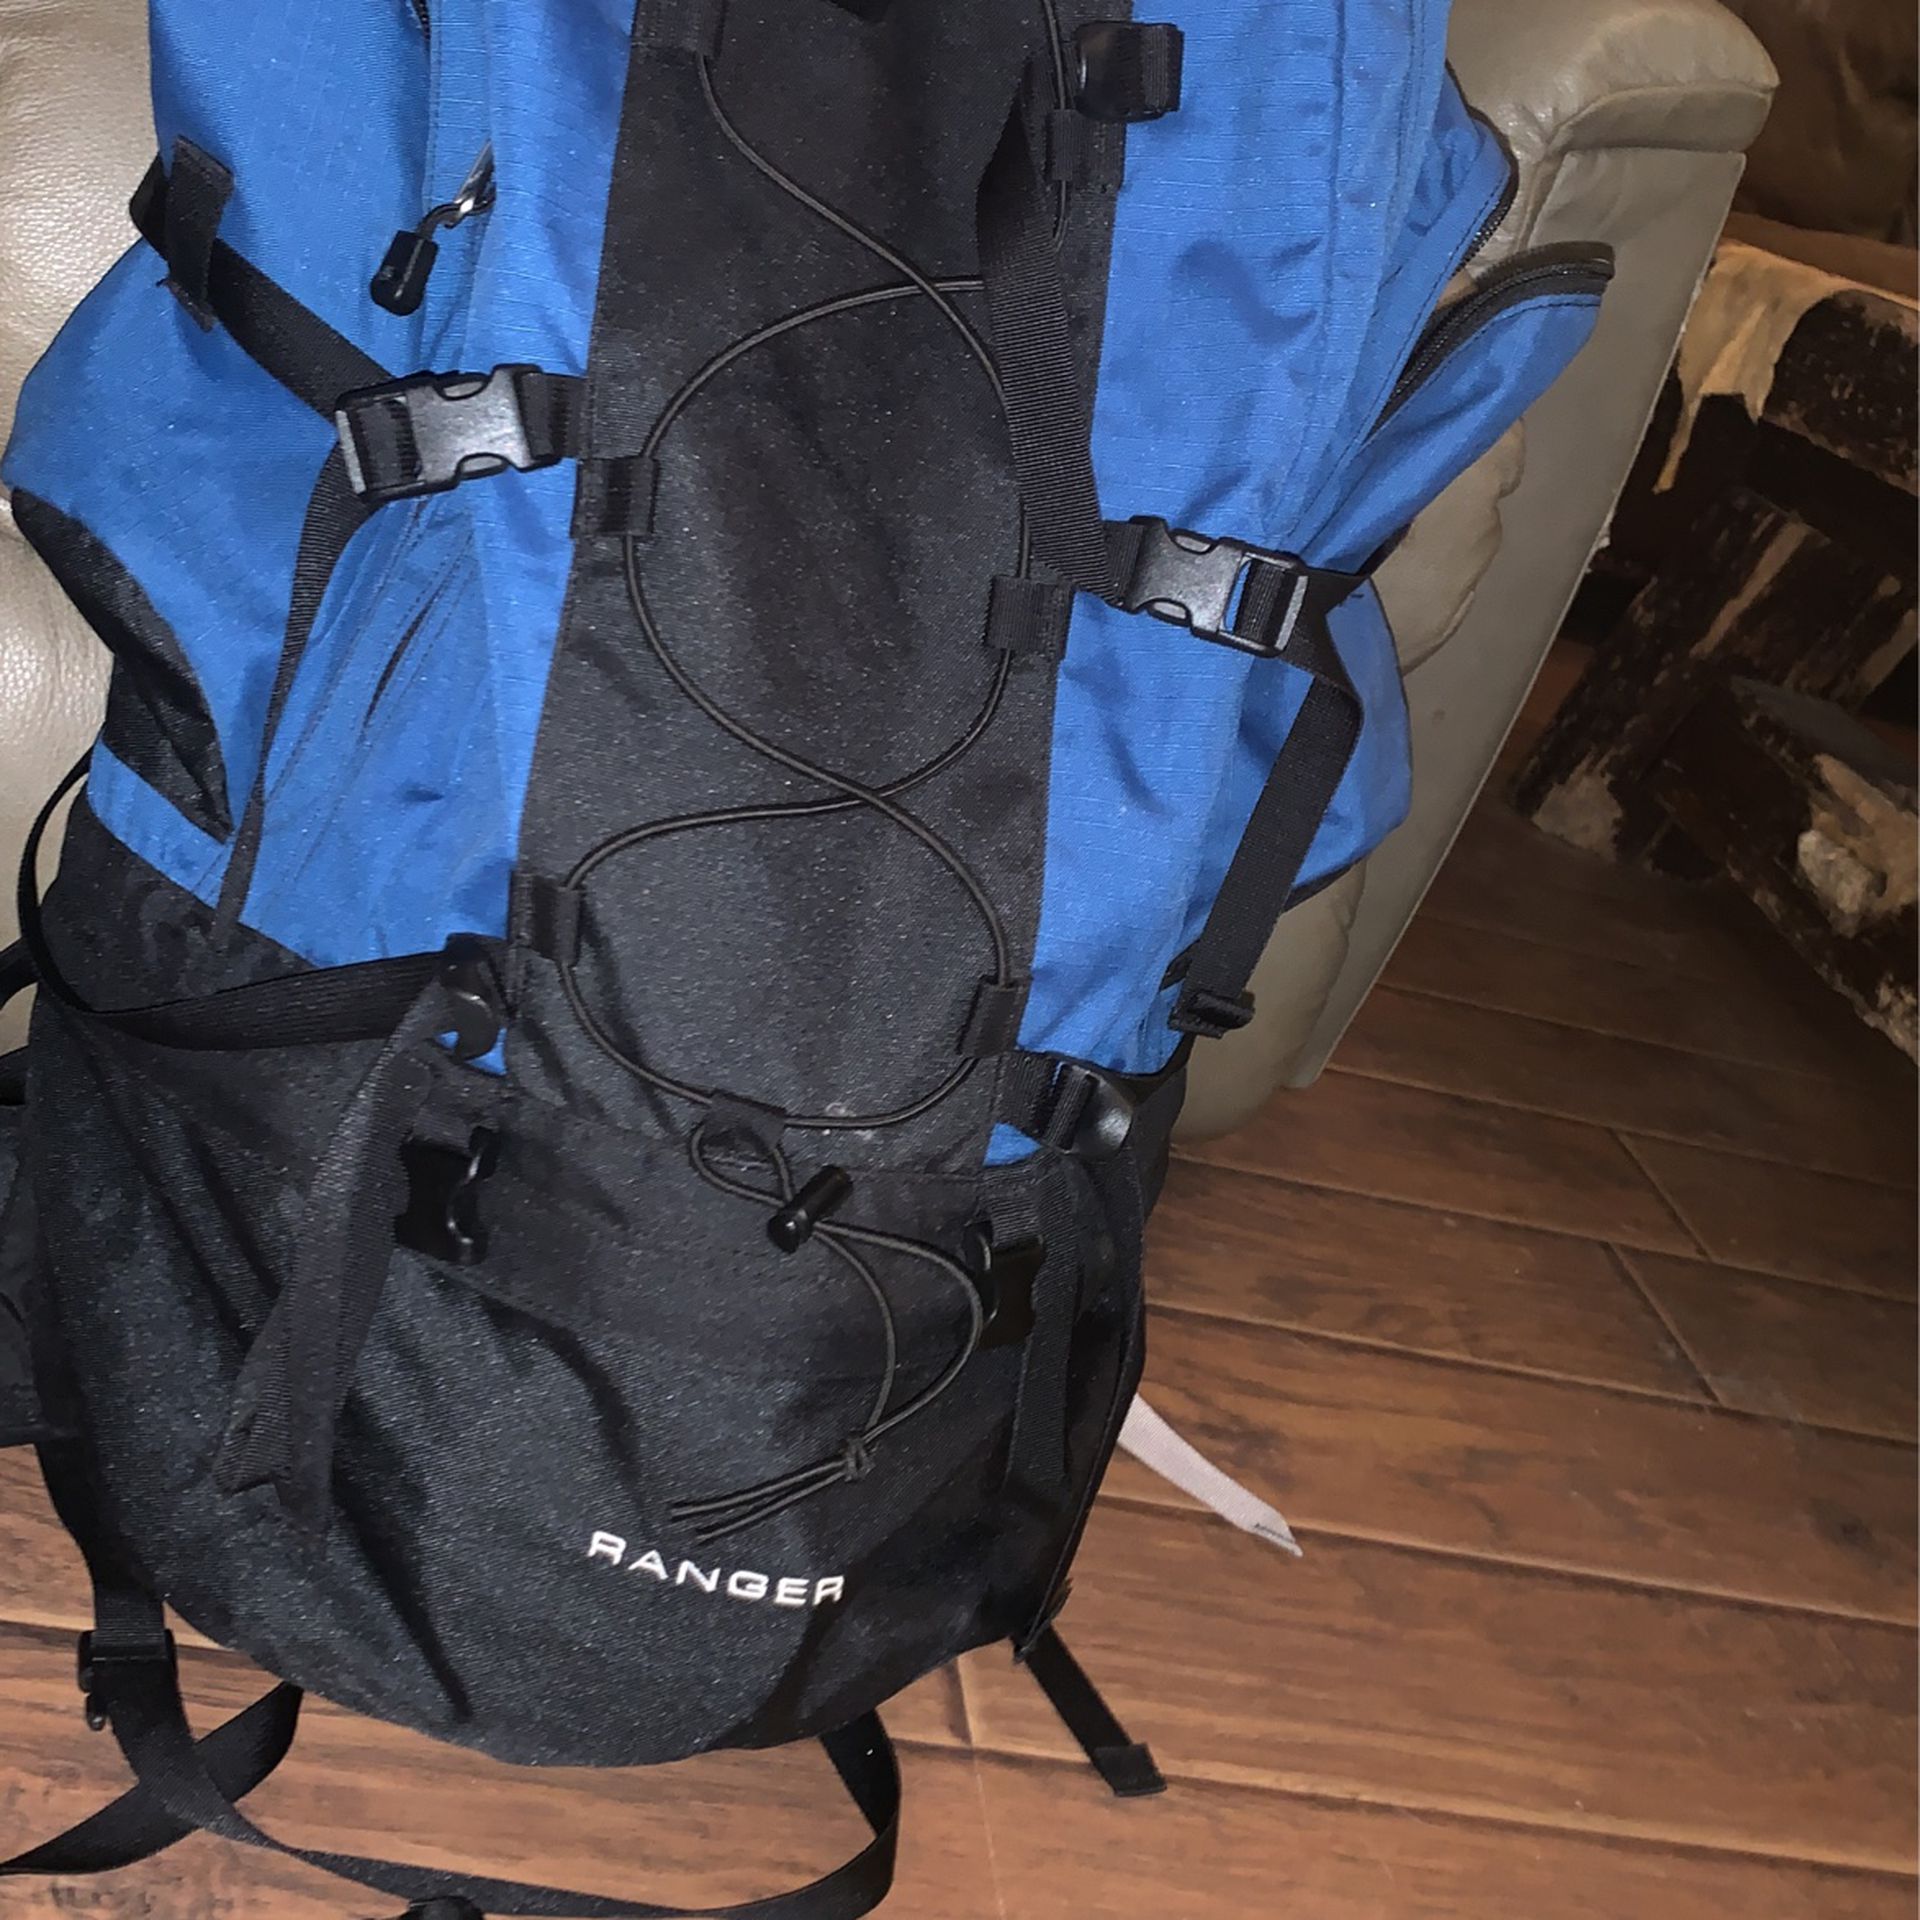 The North Face Ranger Hiking Backpack 